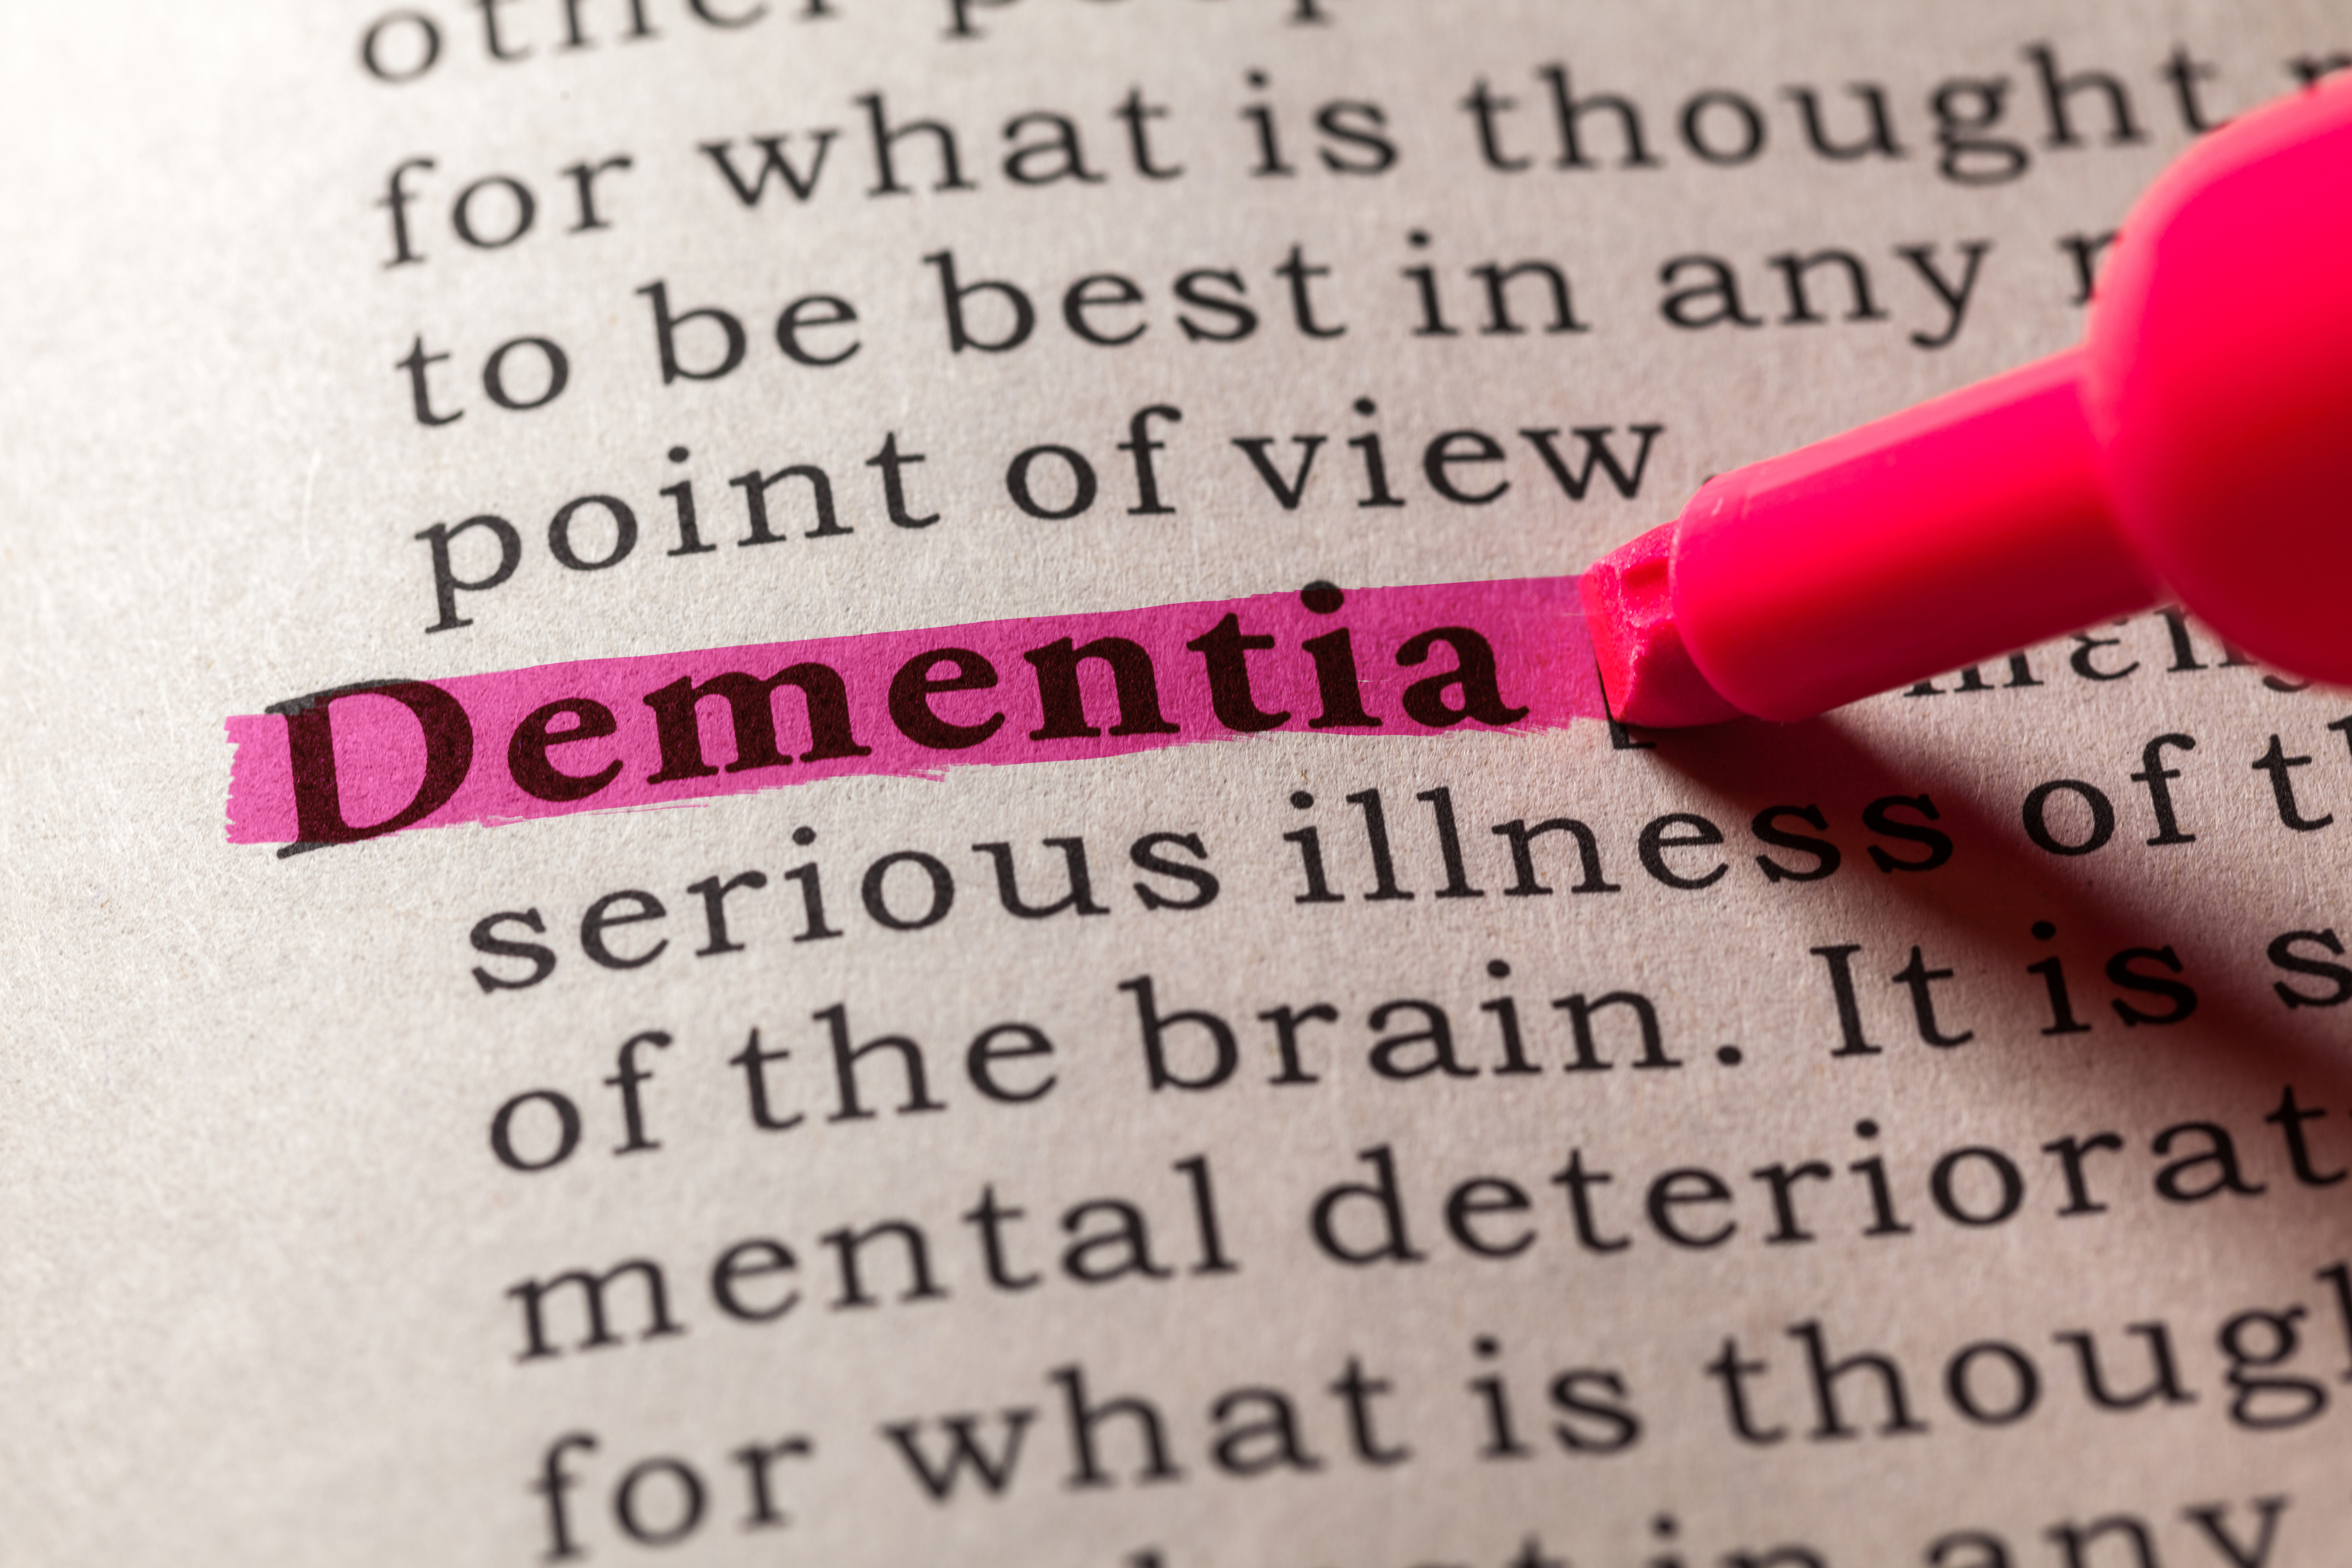 Fake Dictionary, Dictionary definition of the word dementia